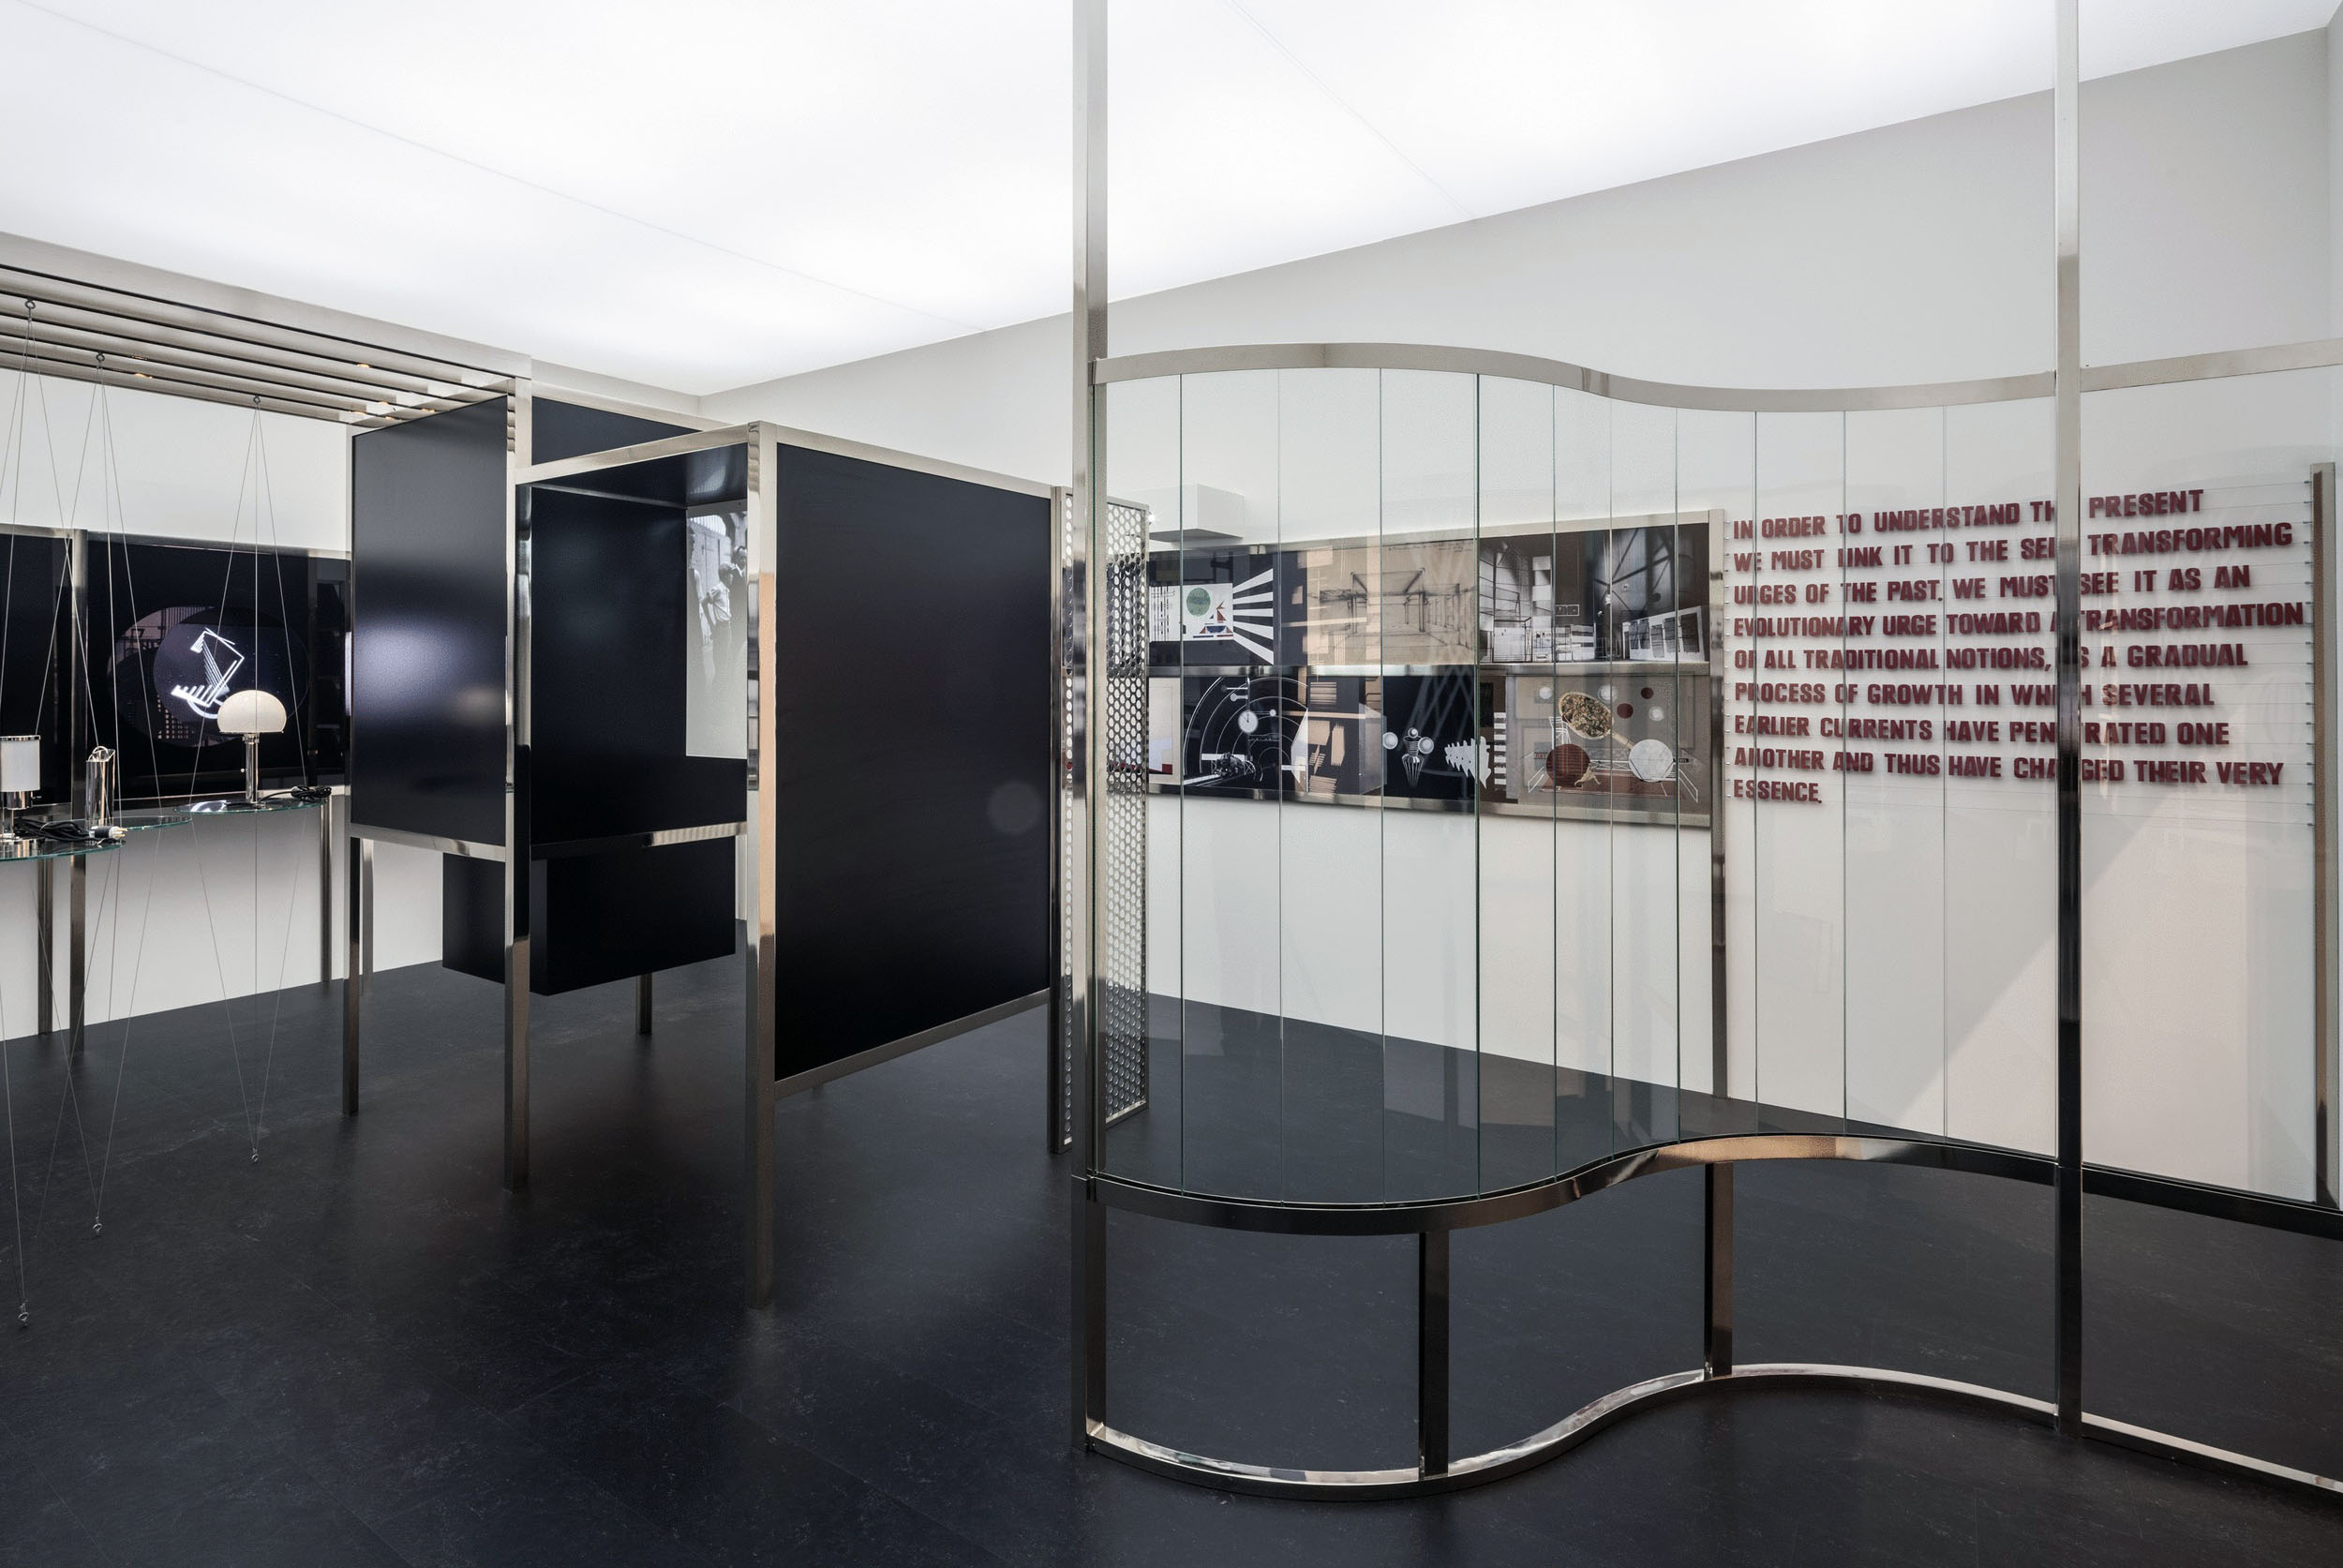 László Moholy-Nagy. 'Room of the Present (Raum der Gegenwart)' constructed in 2009 from plans and other documentation dated 1930